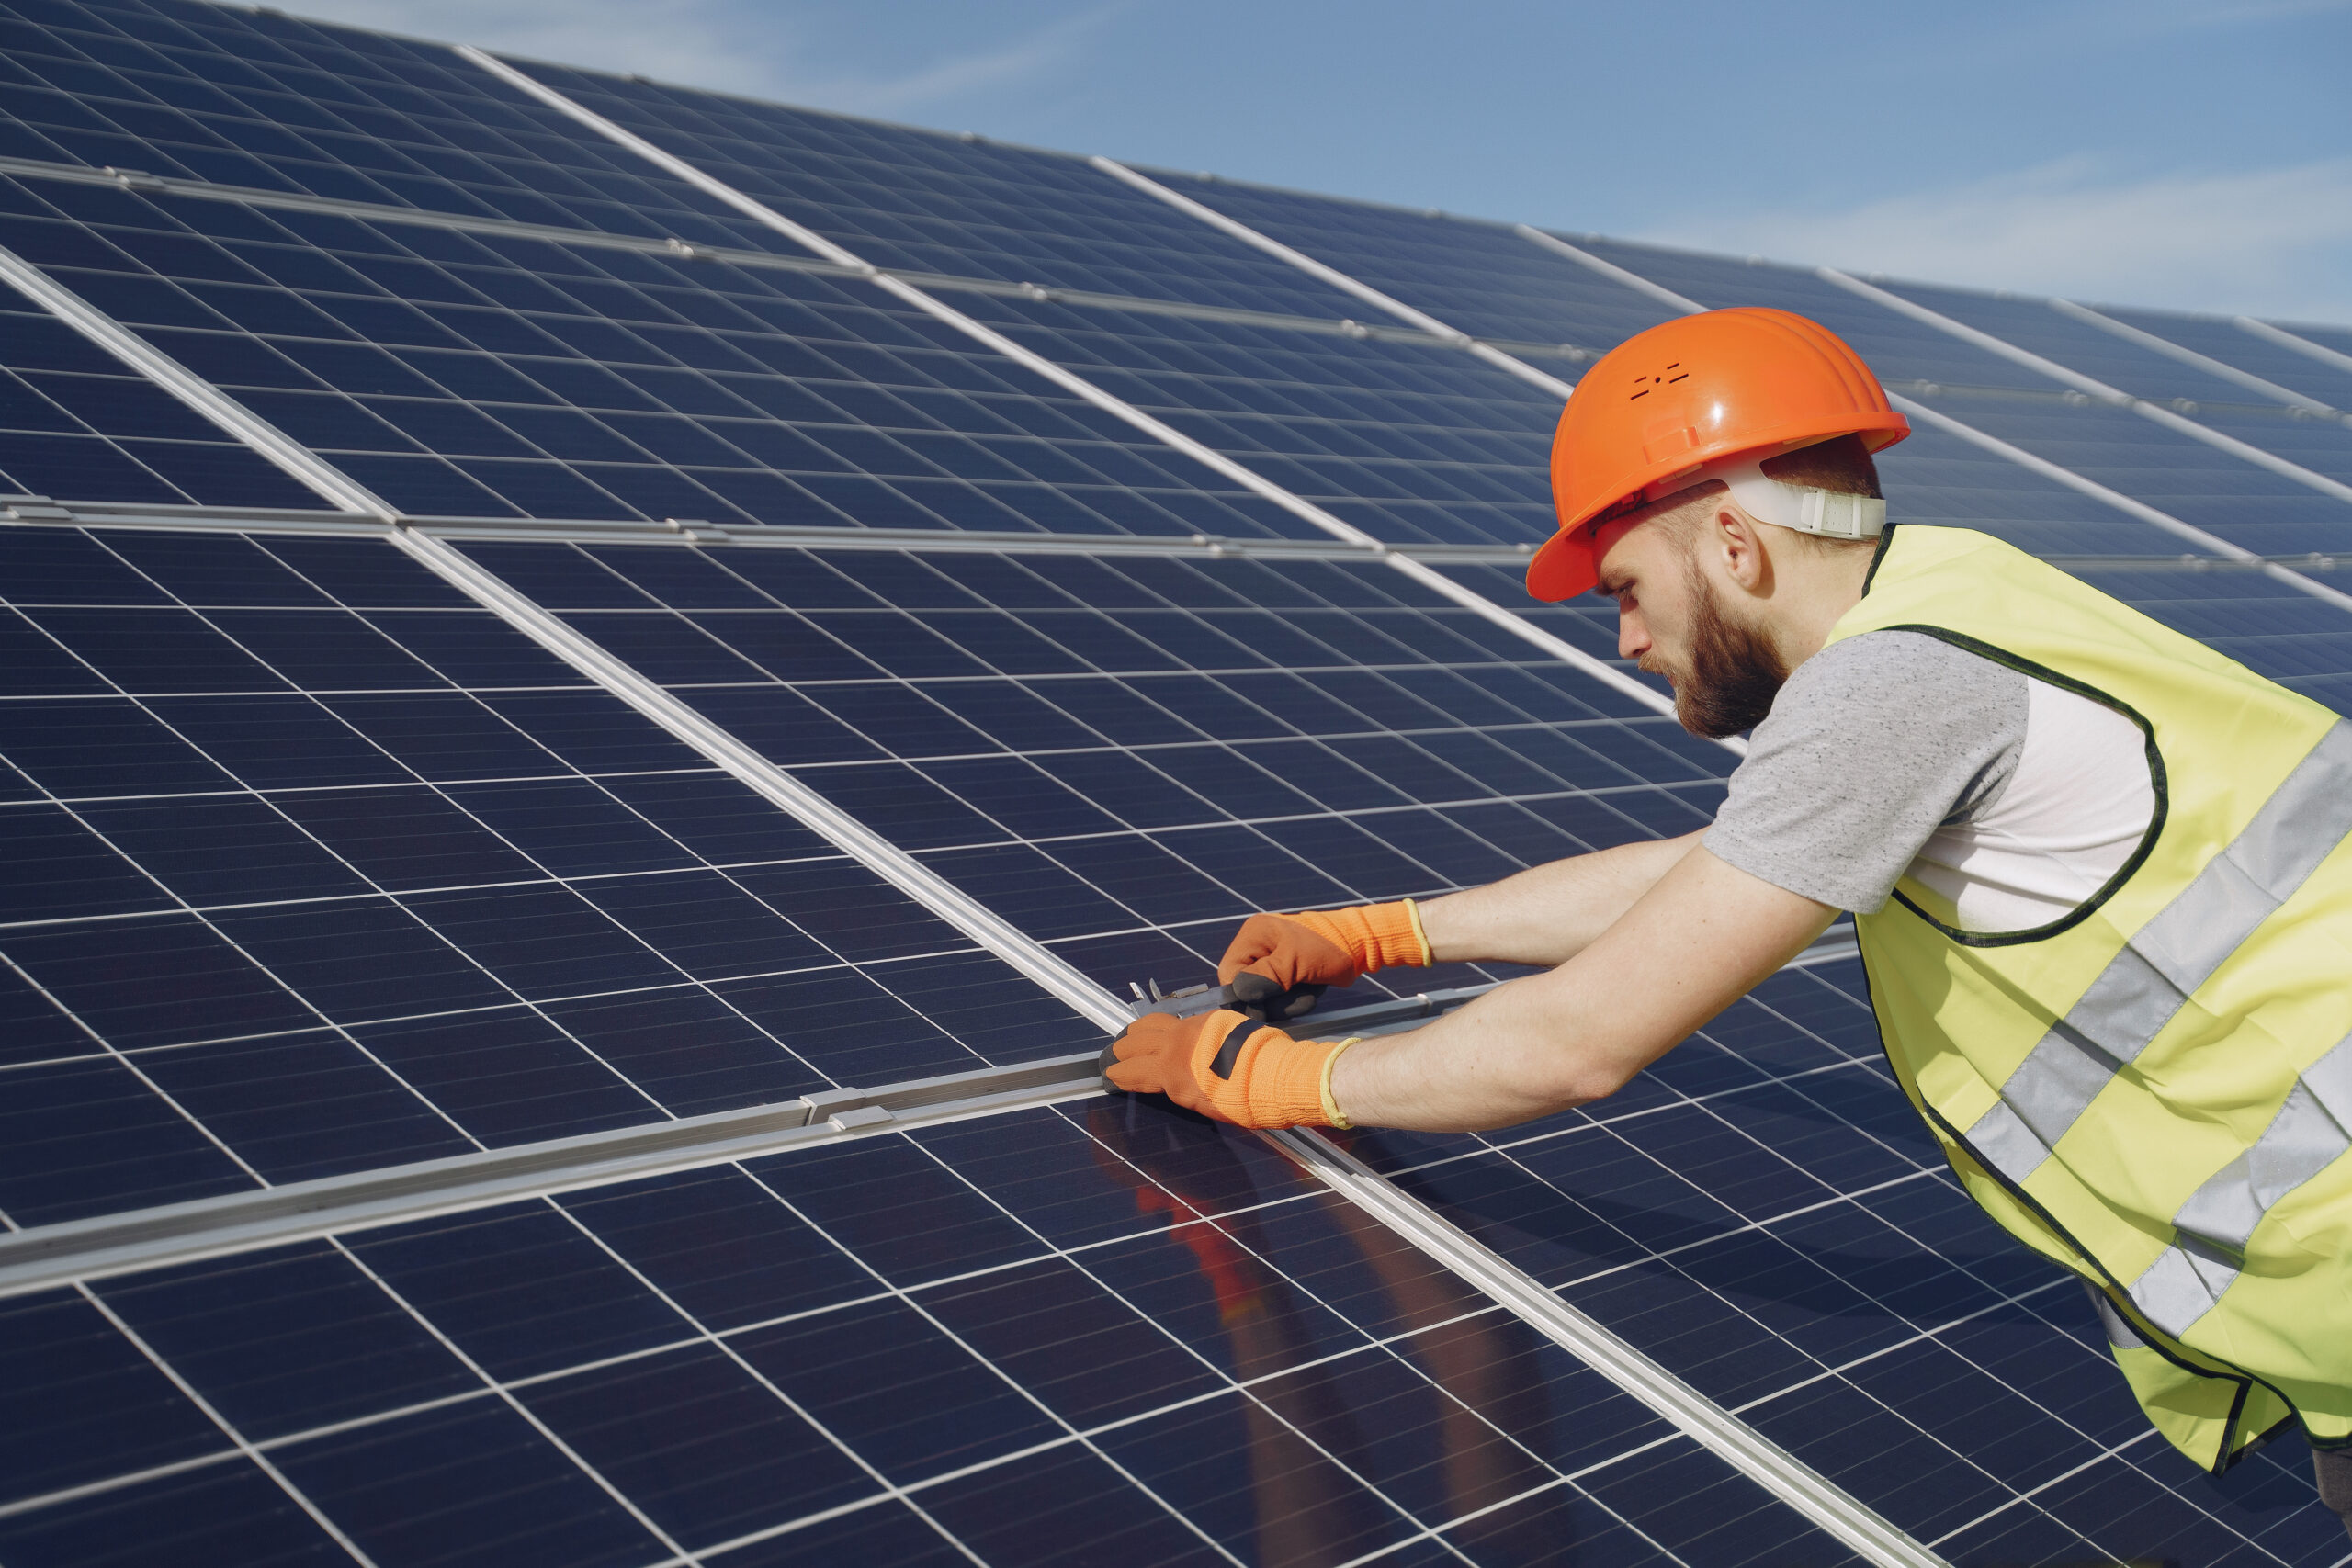 Male worker with solar batteries. Man in a protective helmet. Installing stand-alone solar panel system.